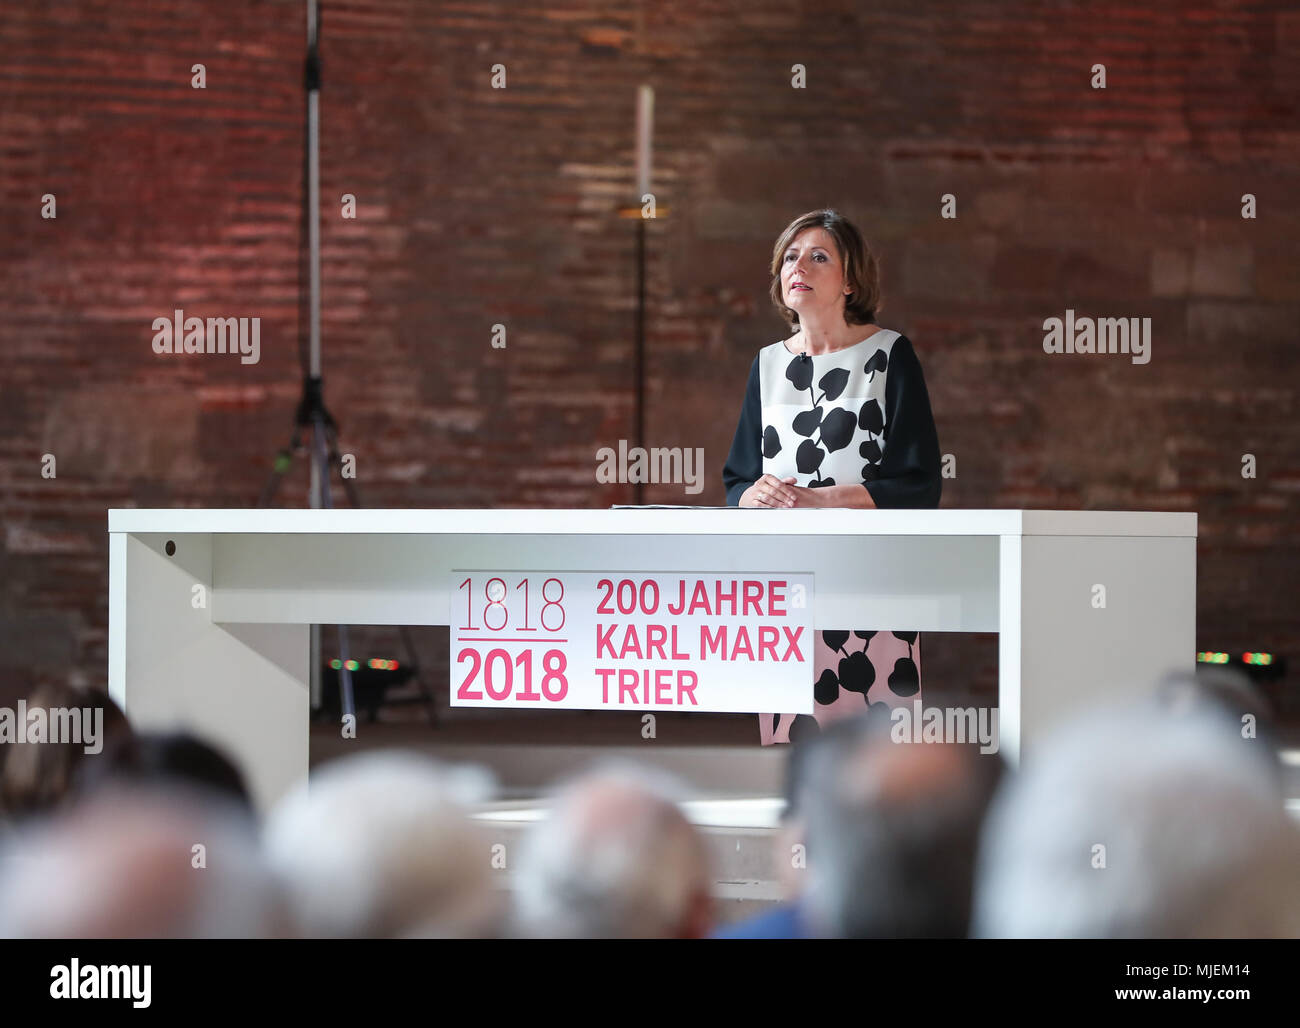 Trier, Germany. 4th May, 2018. Governor of Rhineland-Palatinate Malu Dreyer delivers a speech during the opening ceremony of the Karl Marx exhibition, at the Basilica of Constantine in Trier, Germany, on May 4, 2018. European Commission President Jean-Claude Juncker said Friday that Karl Marx was a forward-looking philosopher and his works changed the world, as Marx's hometown Trier is marking the thinker's 200th birthday. Credit: Shan Yuqi/Xinhua/Alamy Live News Stock Photo